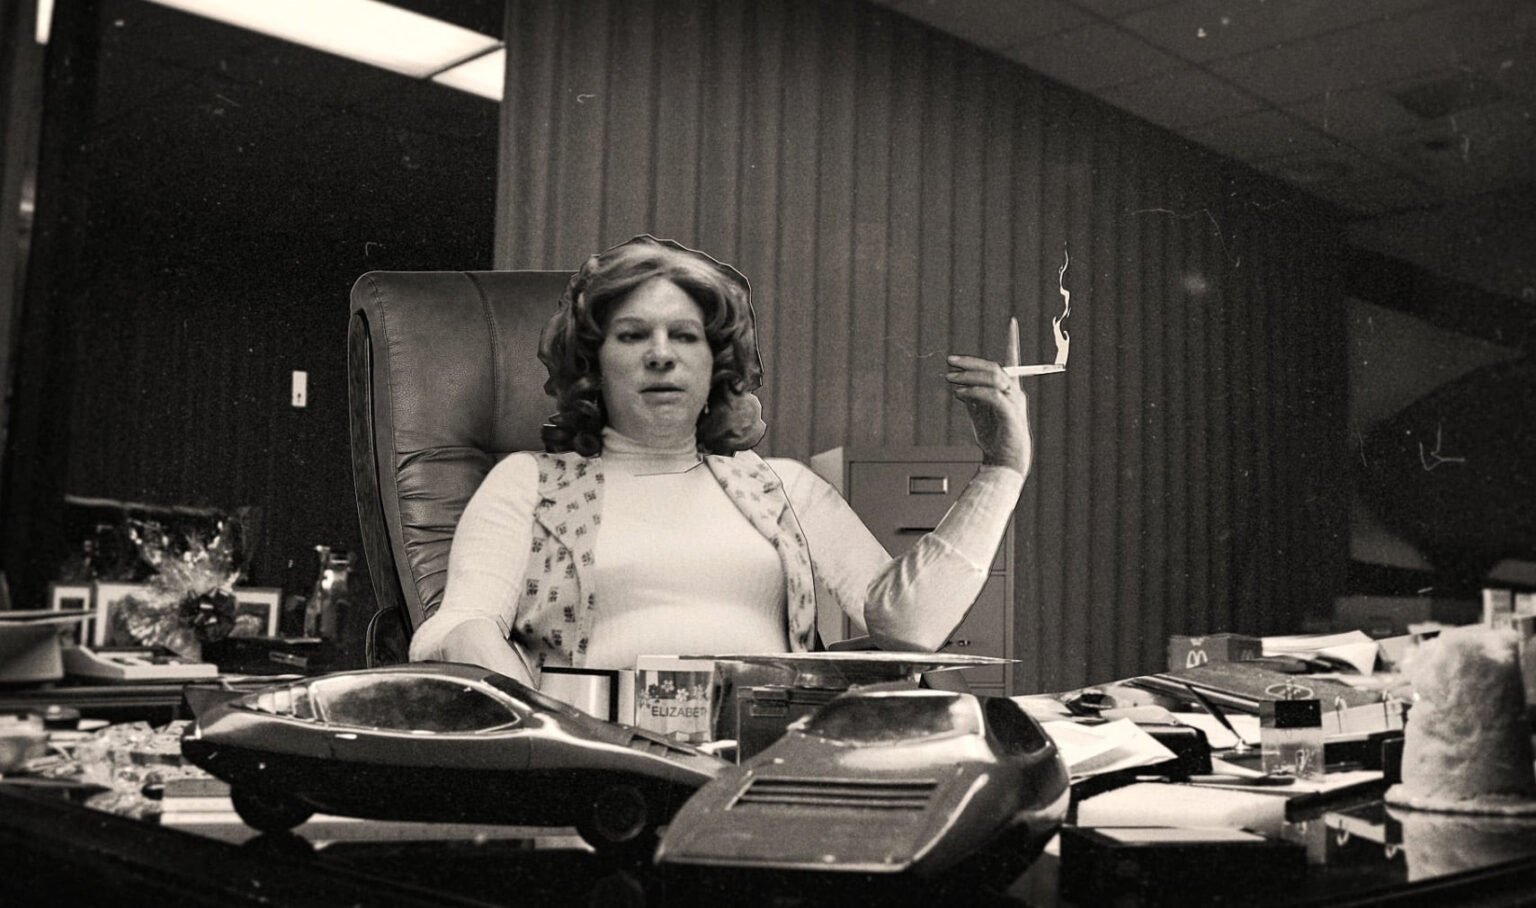 'The Lady and the Dale' explores “an audacious 1970s auto scam centered around a mysterious entrepreneur.” Did this true crime tale change history?